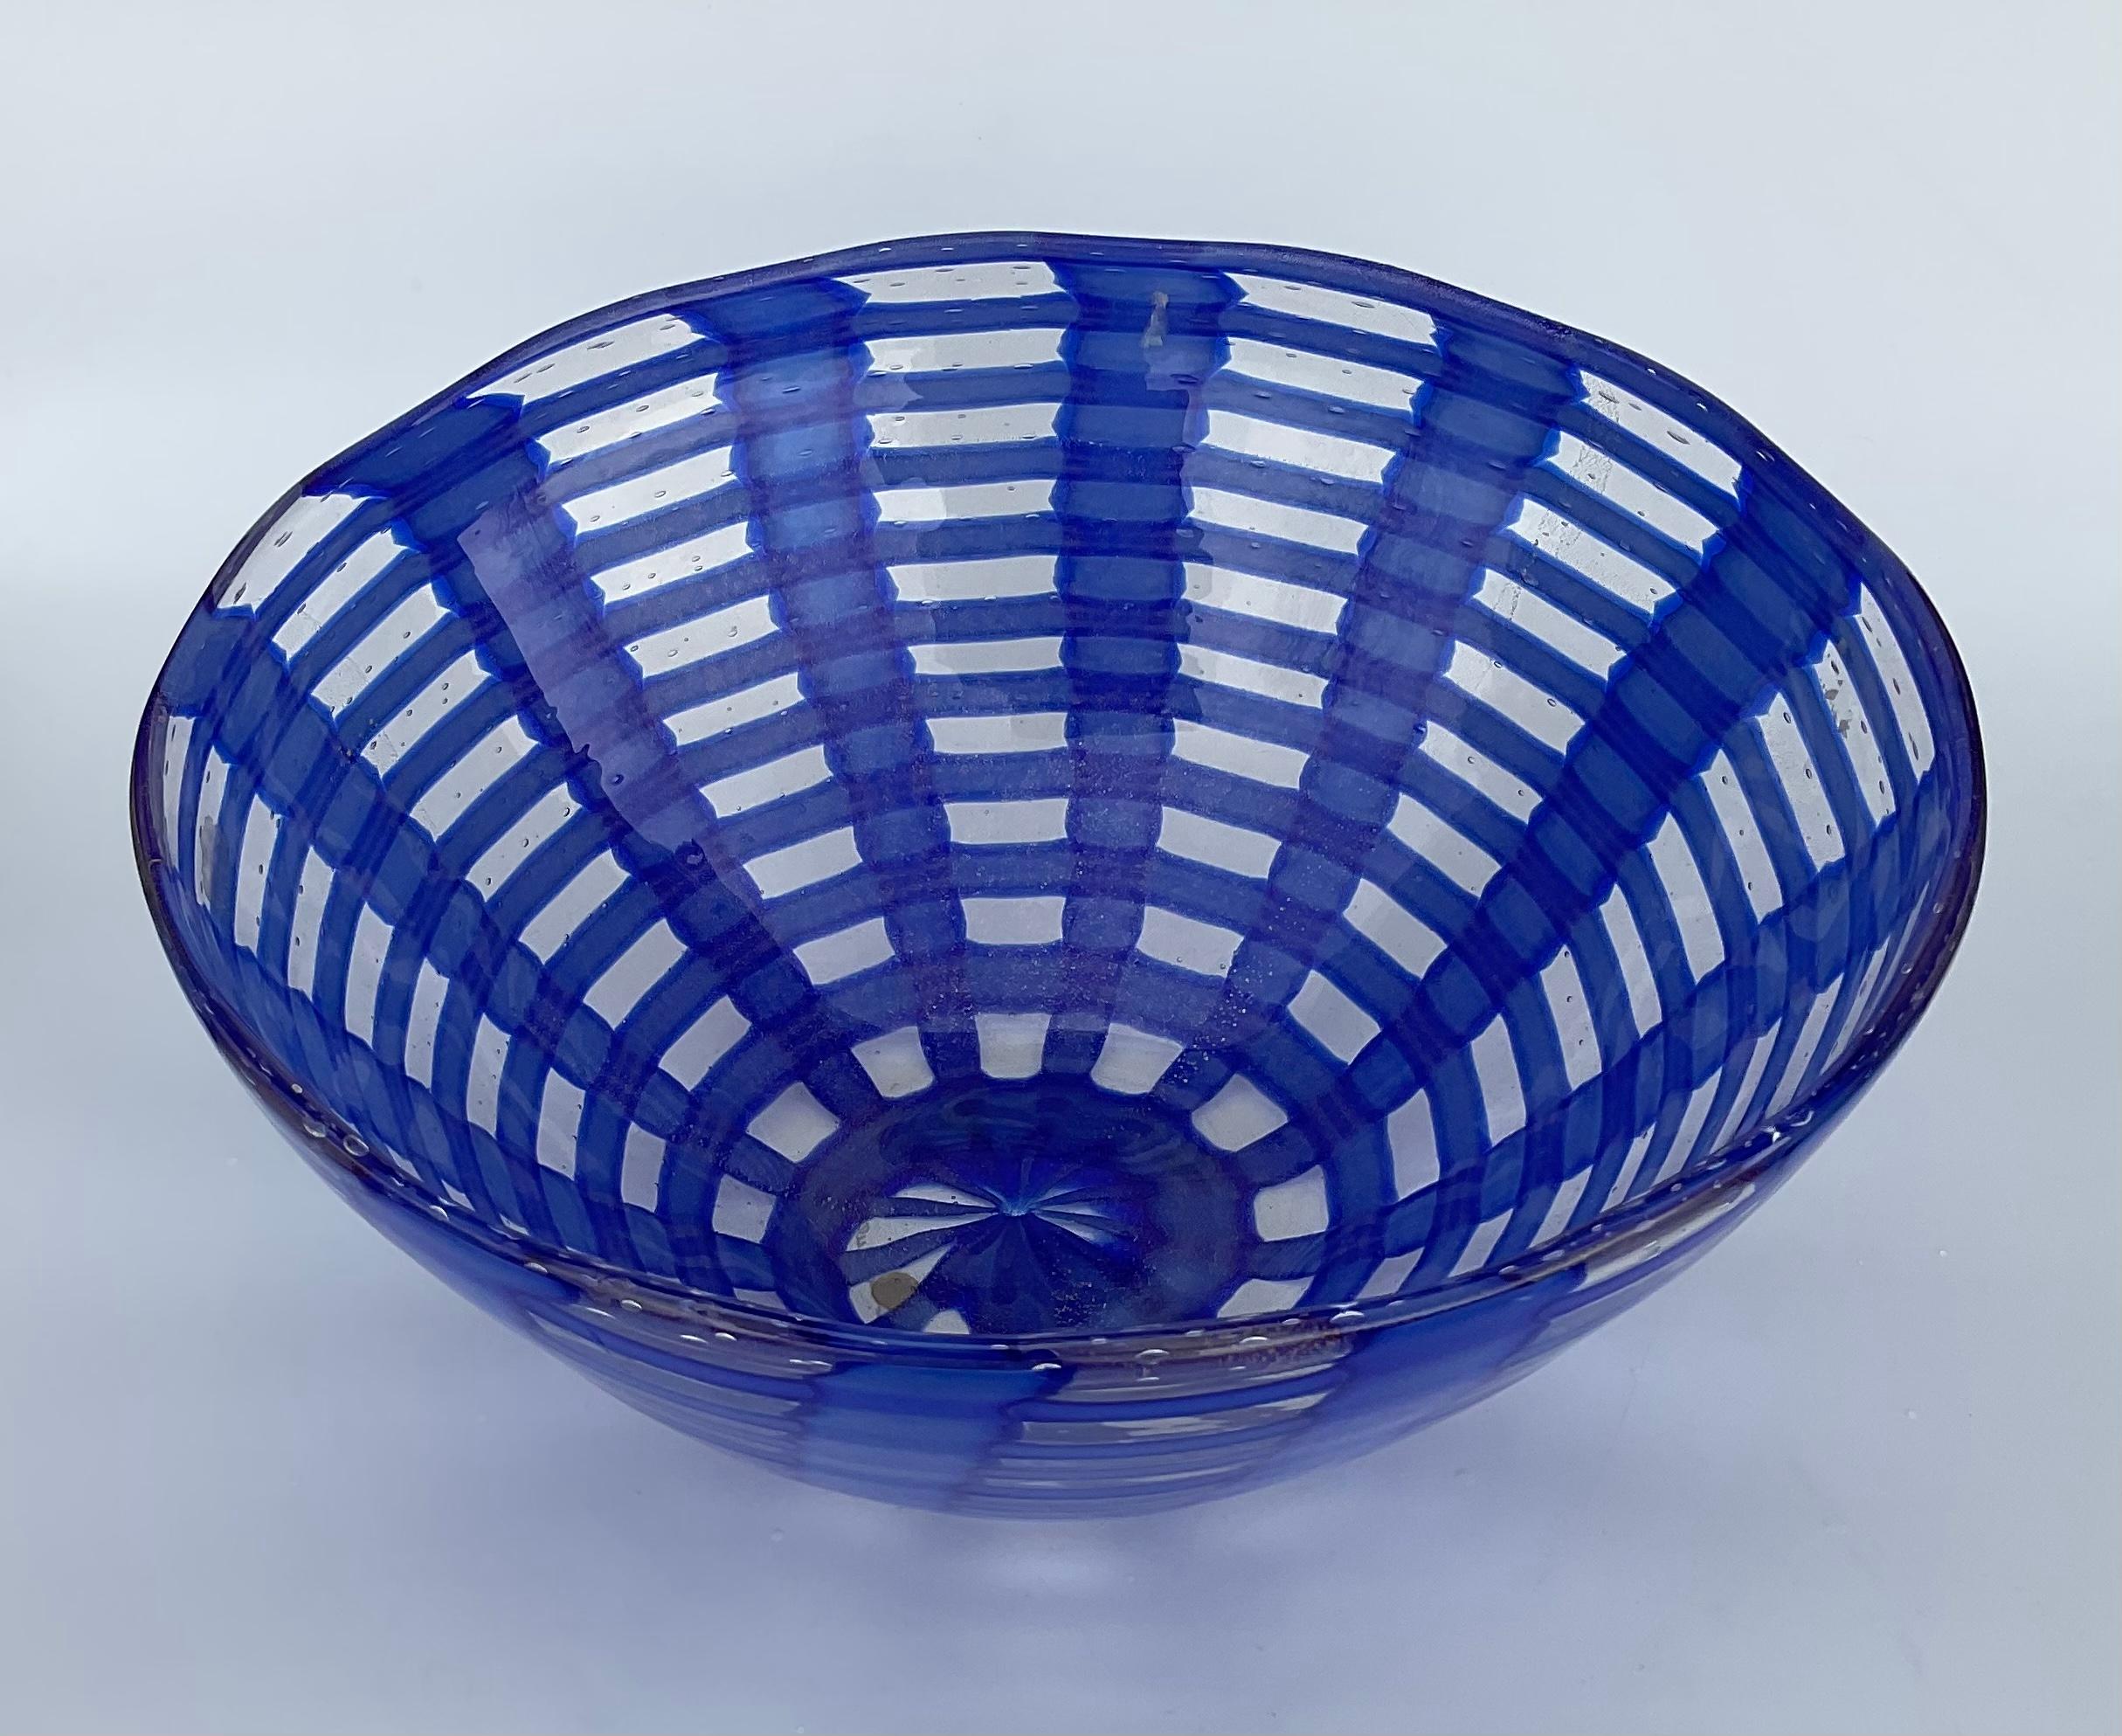 Large Cenedese Murano Signed art glass bowl in swags of blue with gold dust And controlled bubbles. Engraved Signature as shown on the bottom.